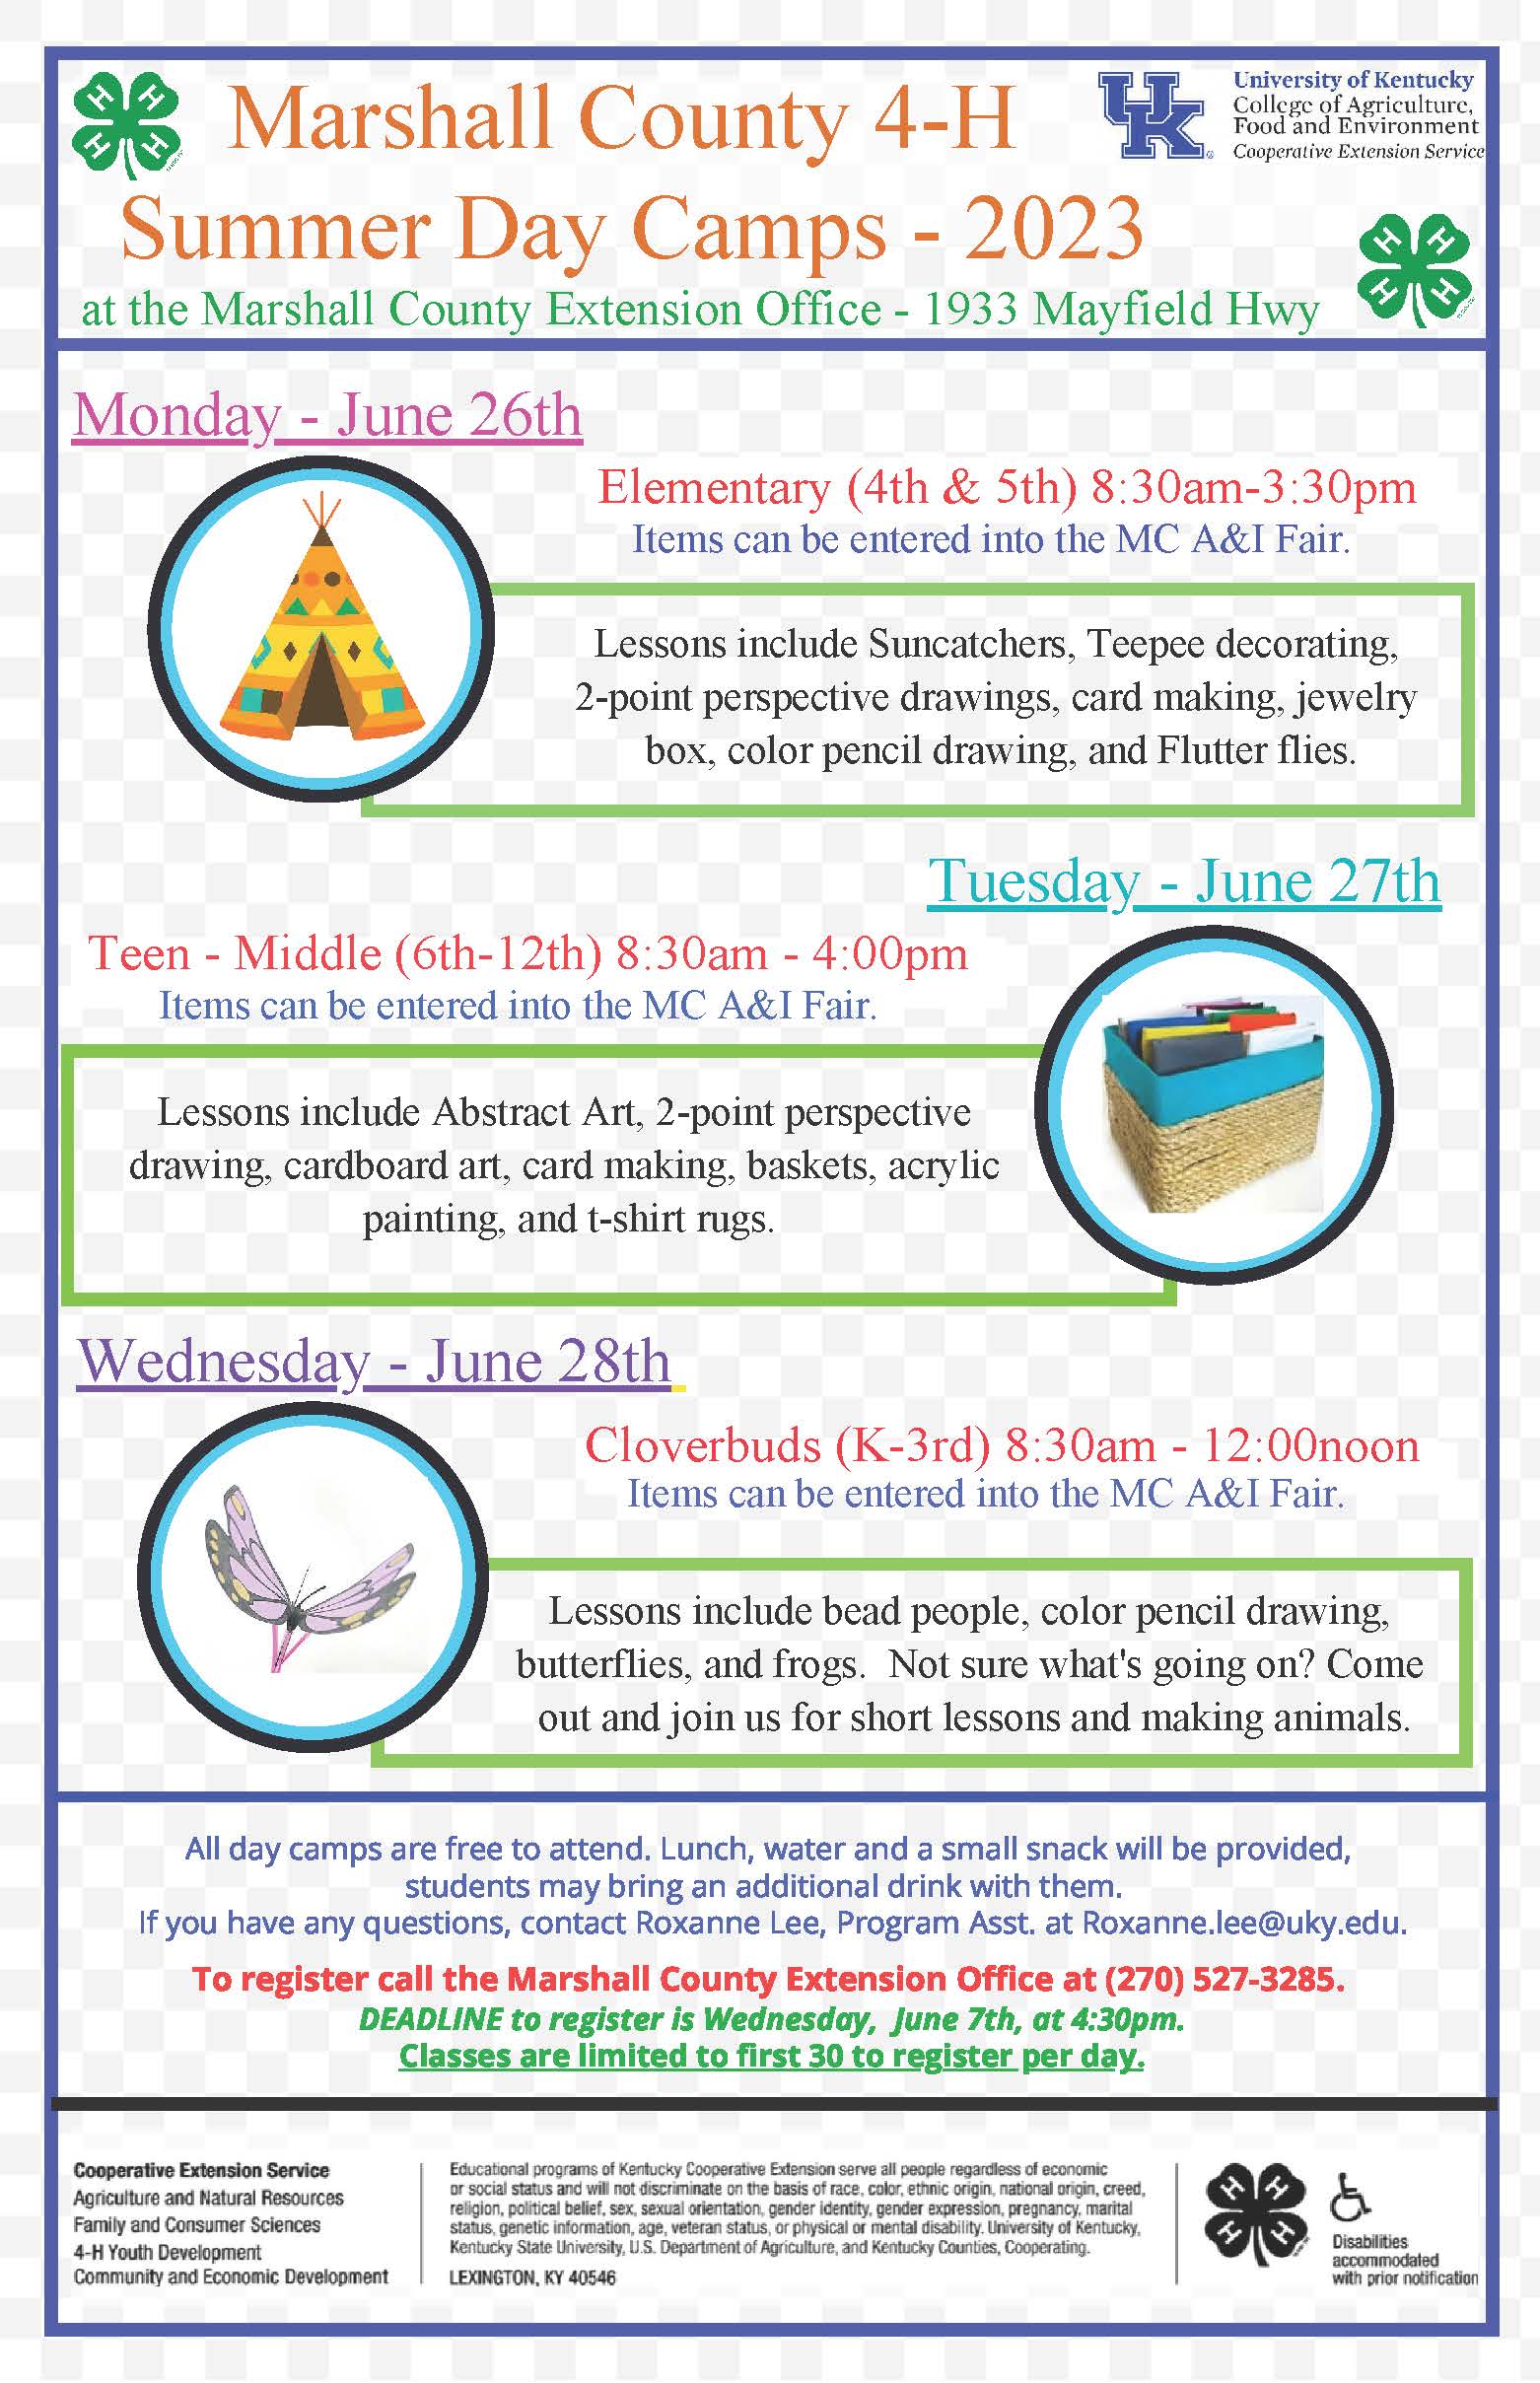 Day camp crafts flyer